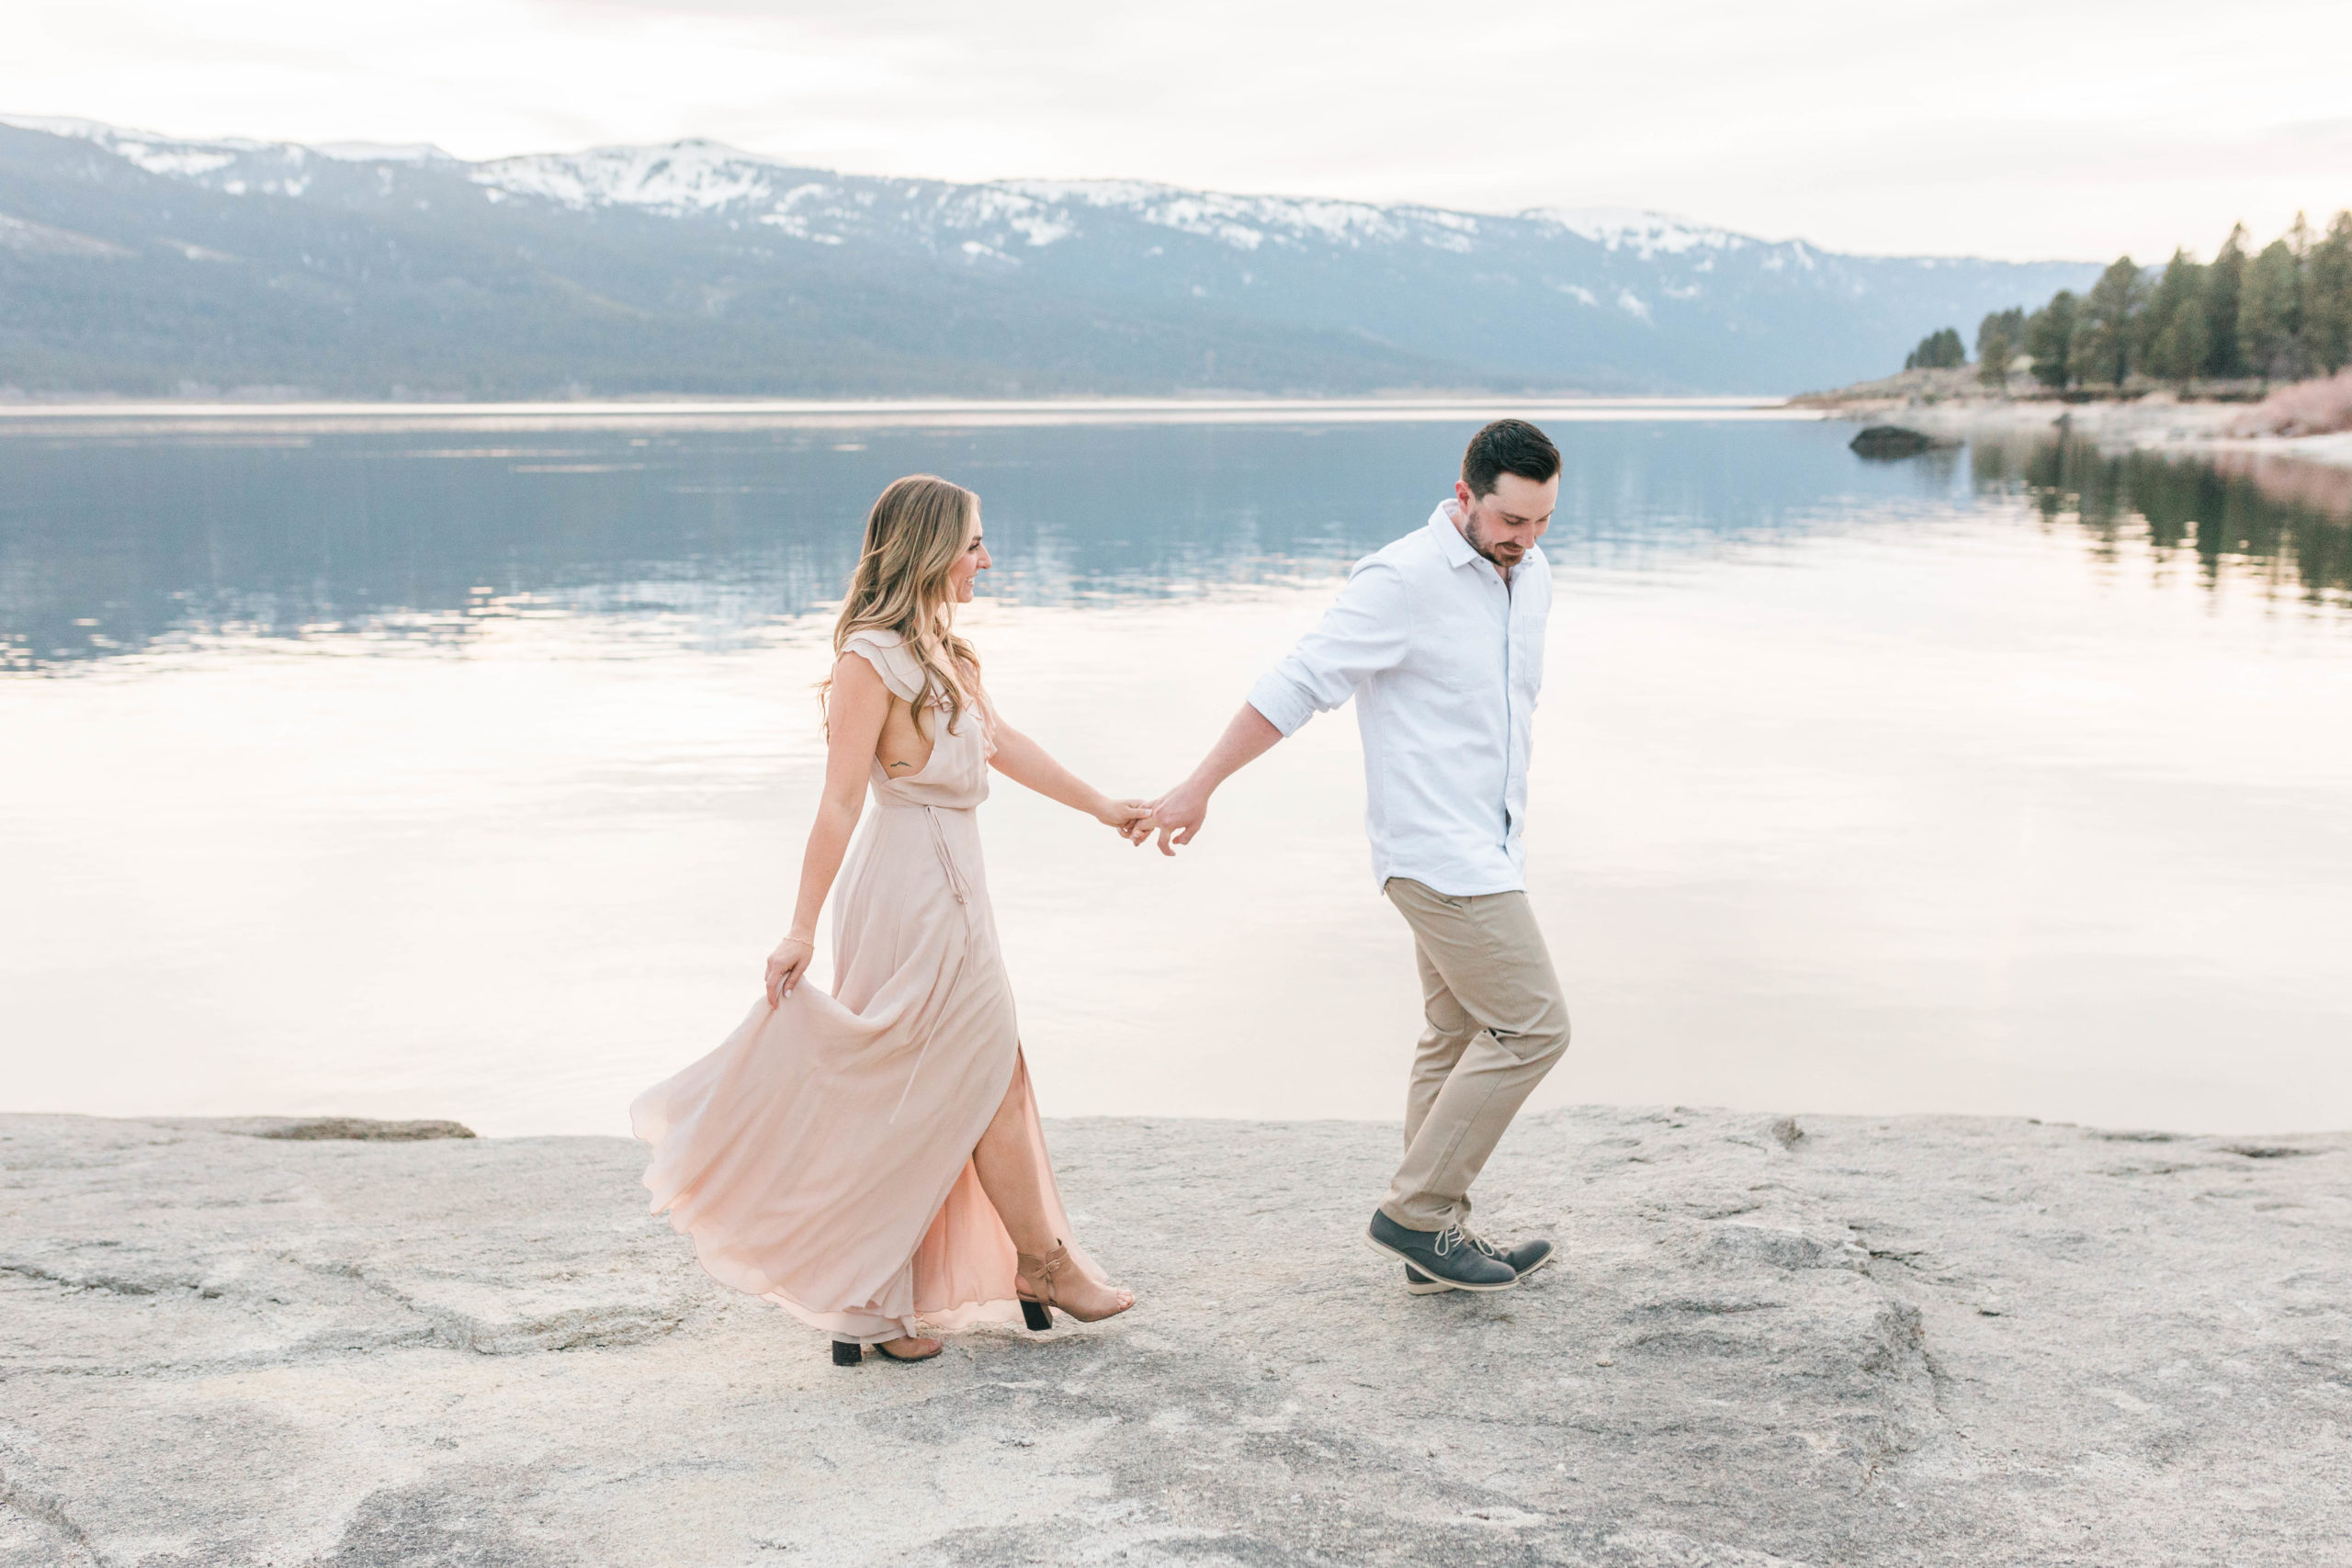 Boise wedding photographer captures couple holding hands and walking together